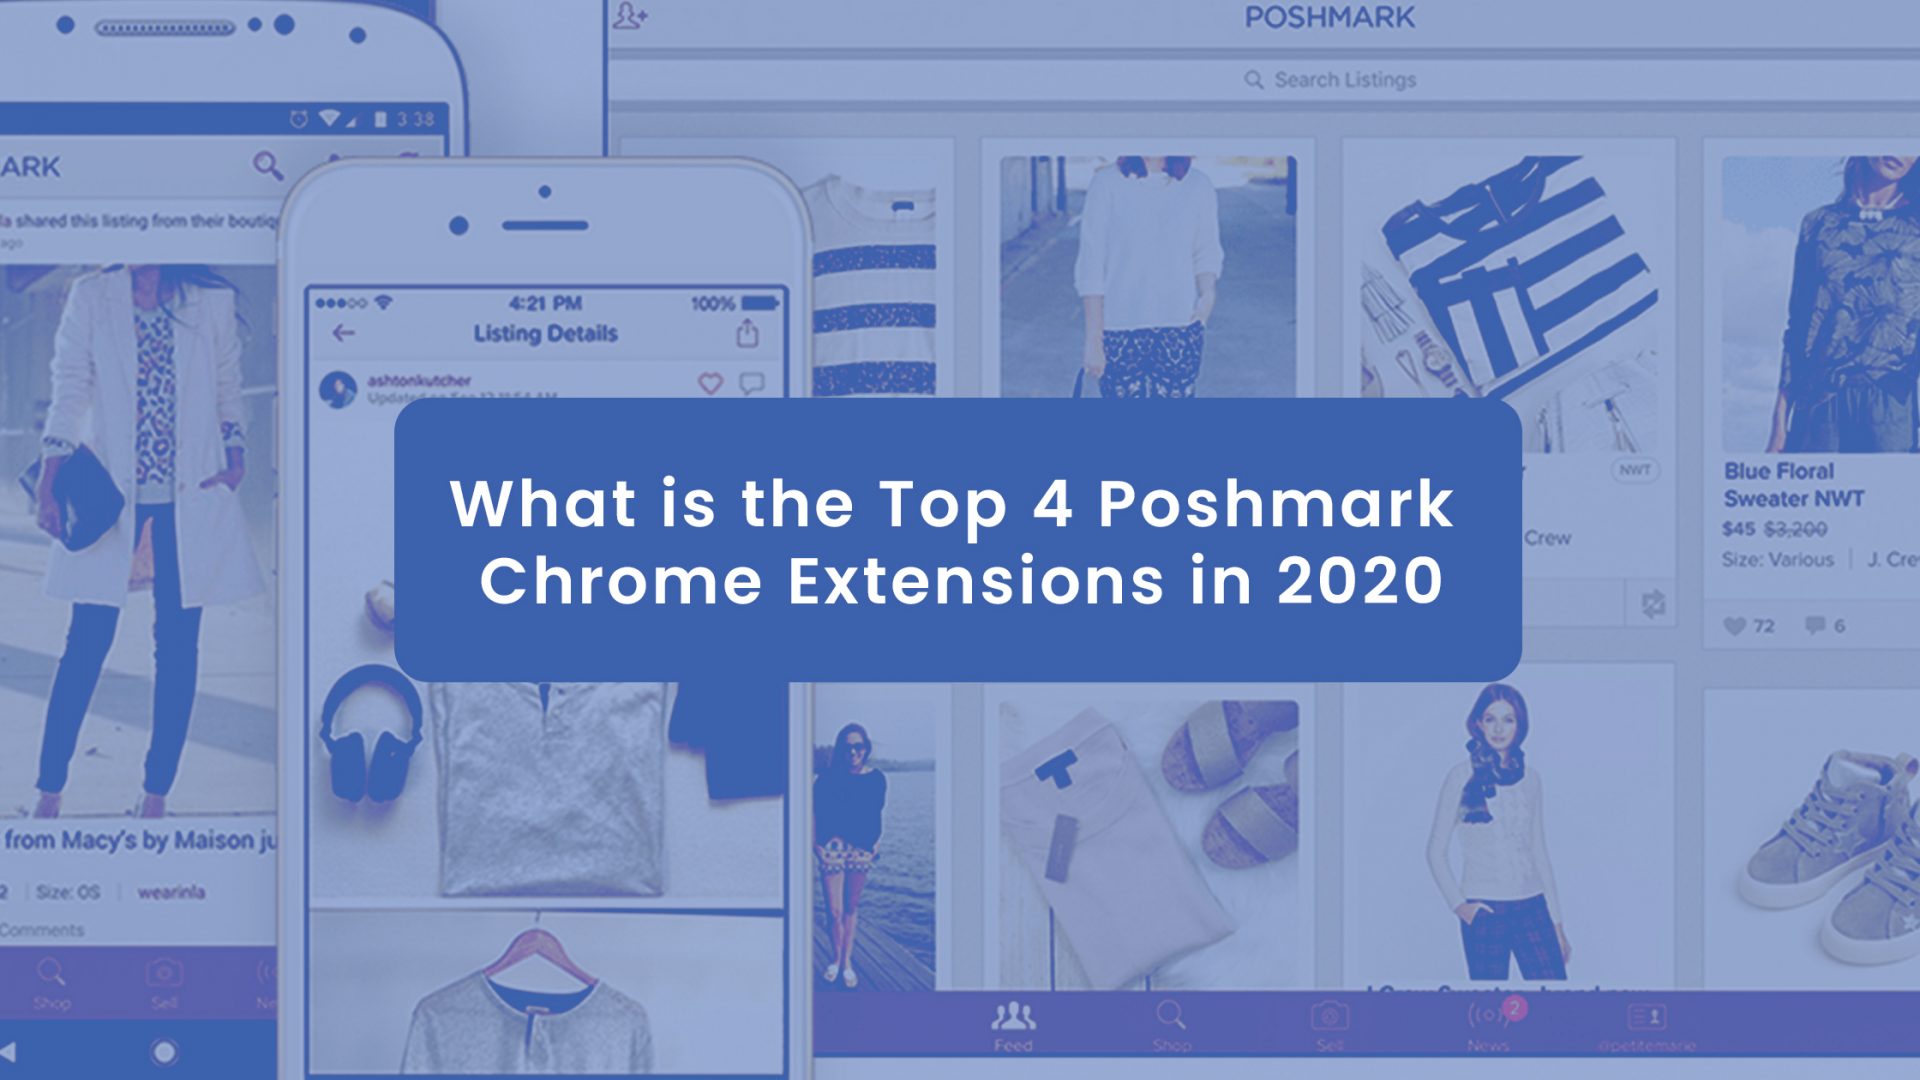 What are the Top 4 Poshmark Chrome Extensions in 2021?